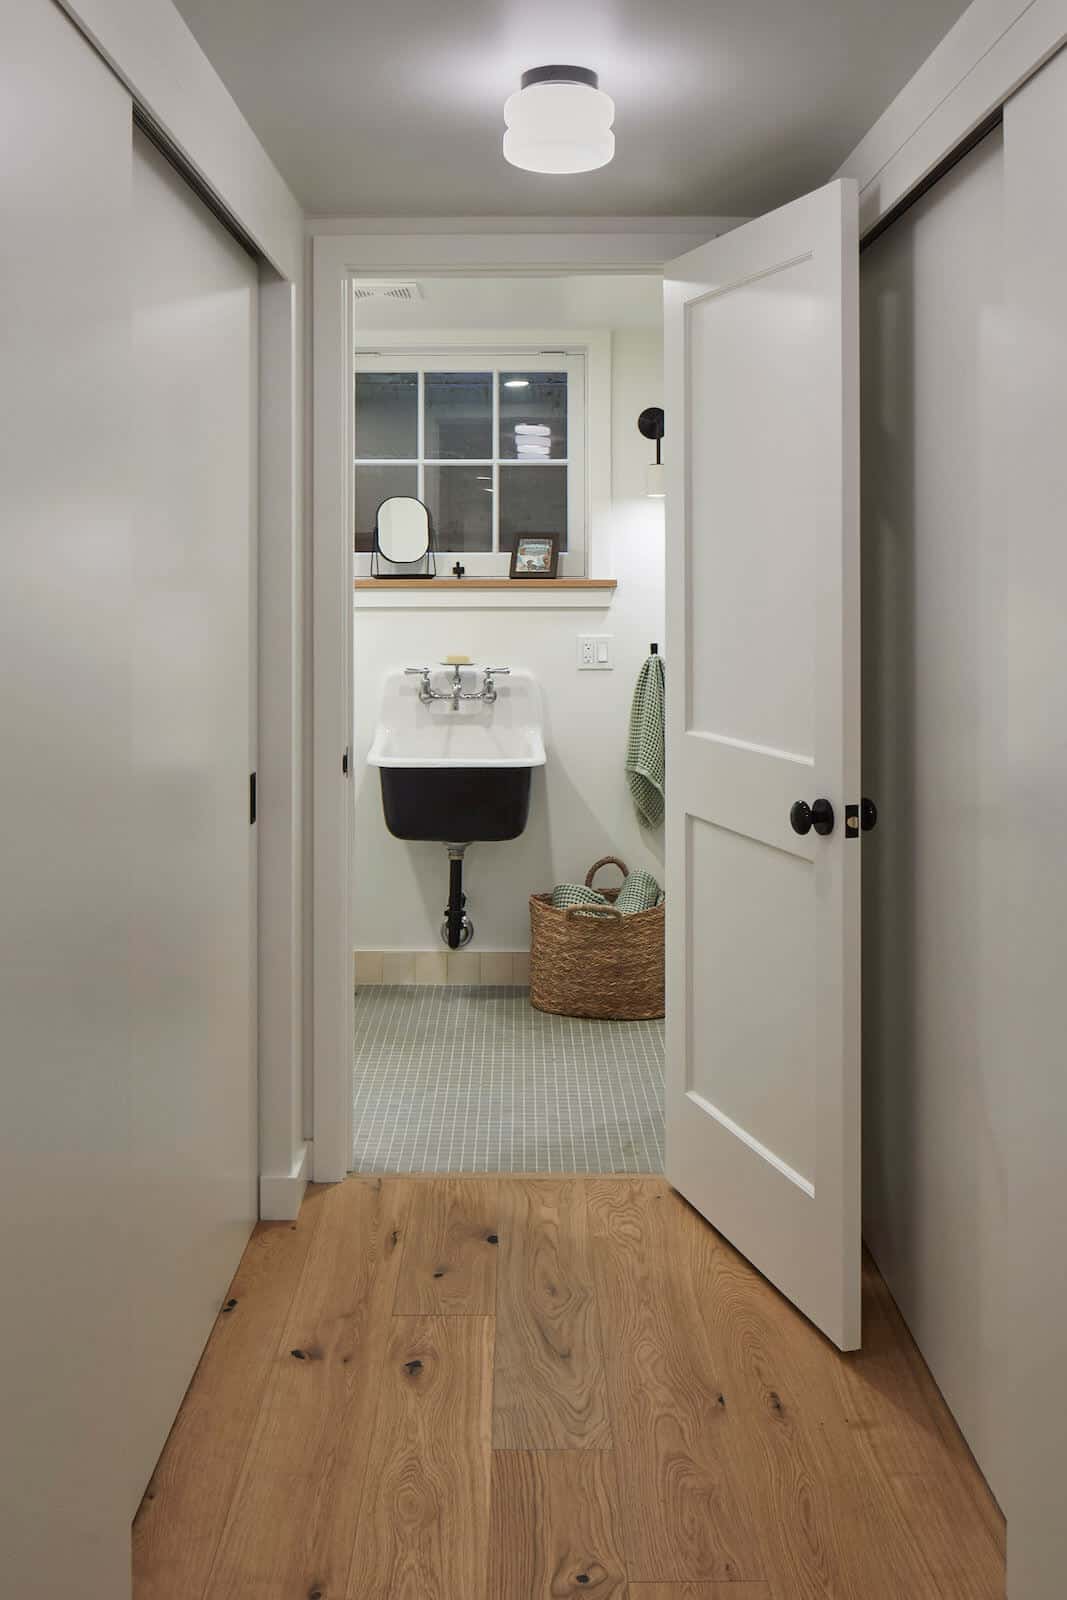 entry in to remodeled bathroom